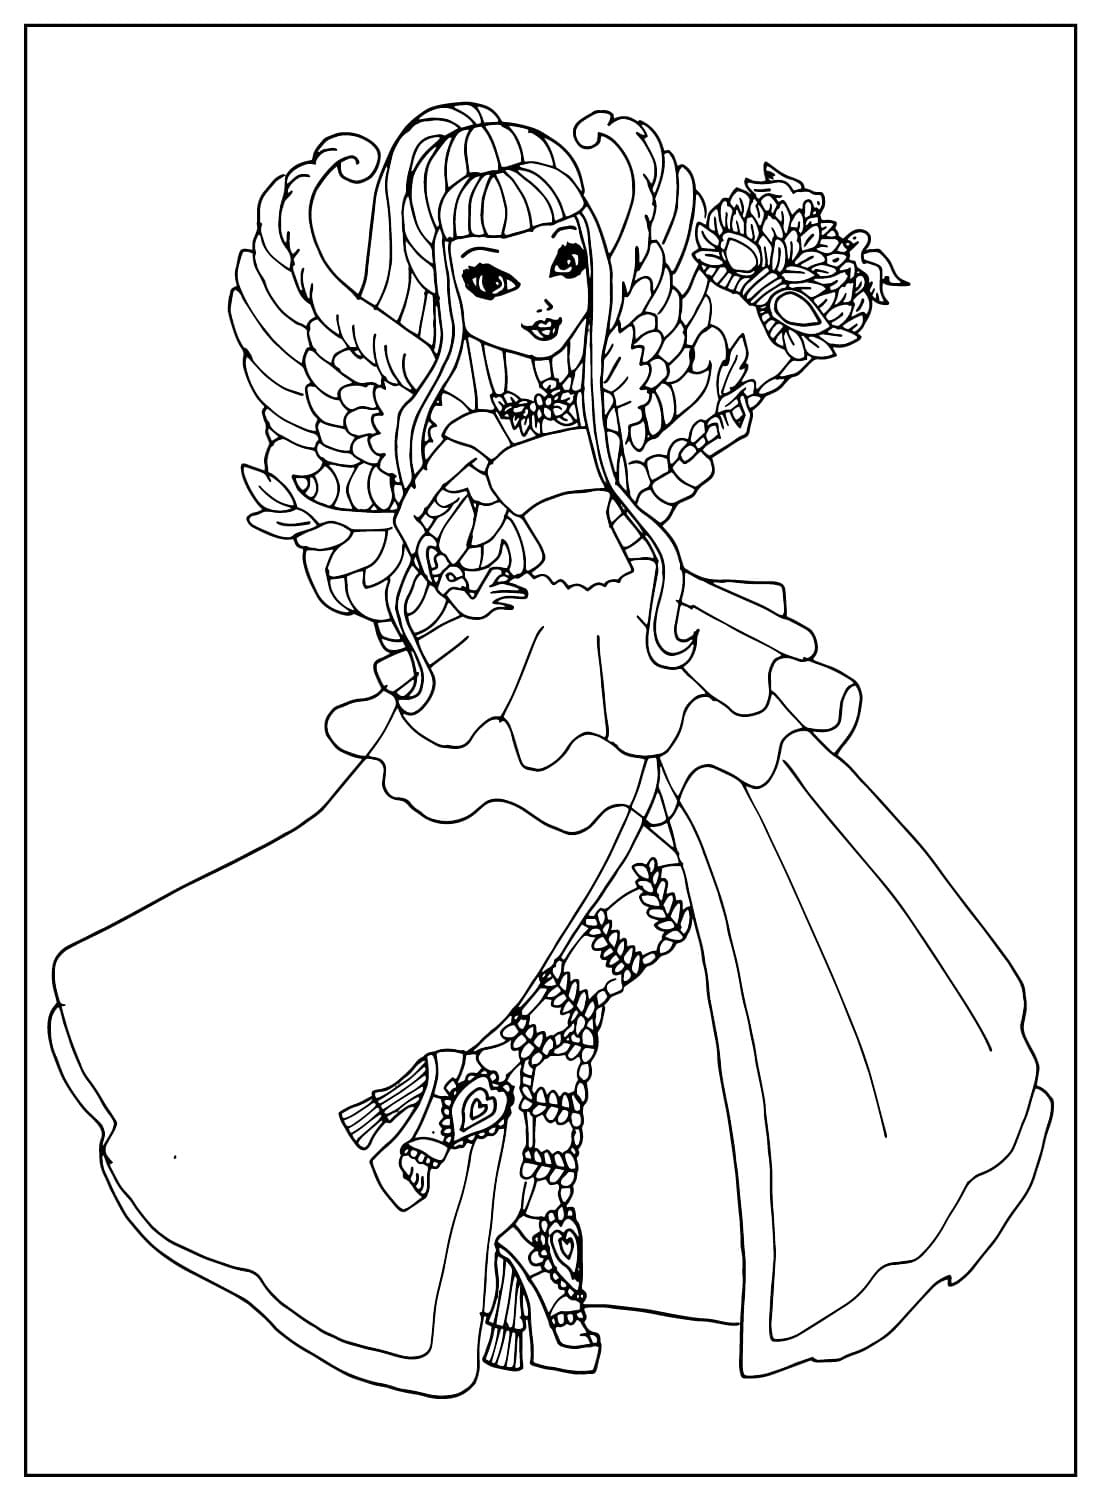 Monster High Coloring Page Free Printable from Monster High